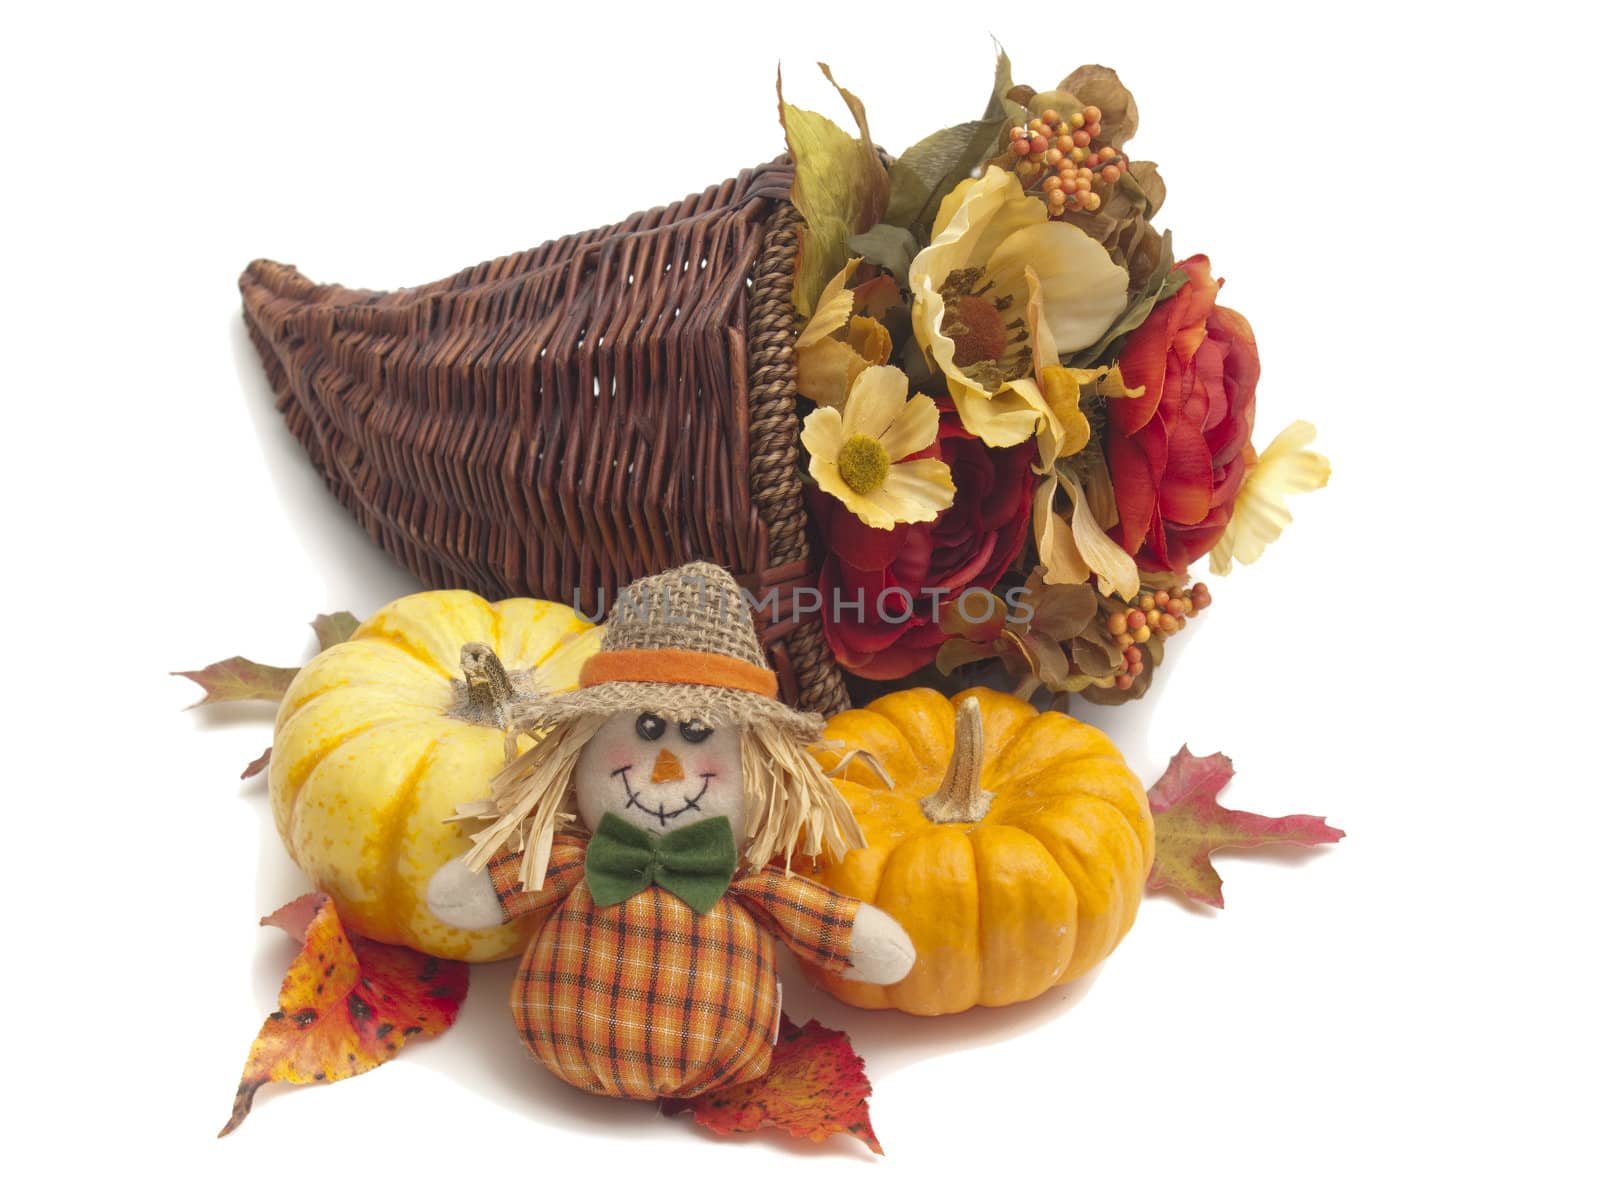 Cornucopia of flowers with pumpkins and scarecrow doll by waxart